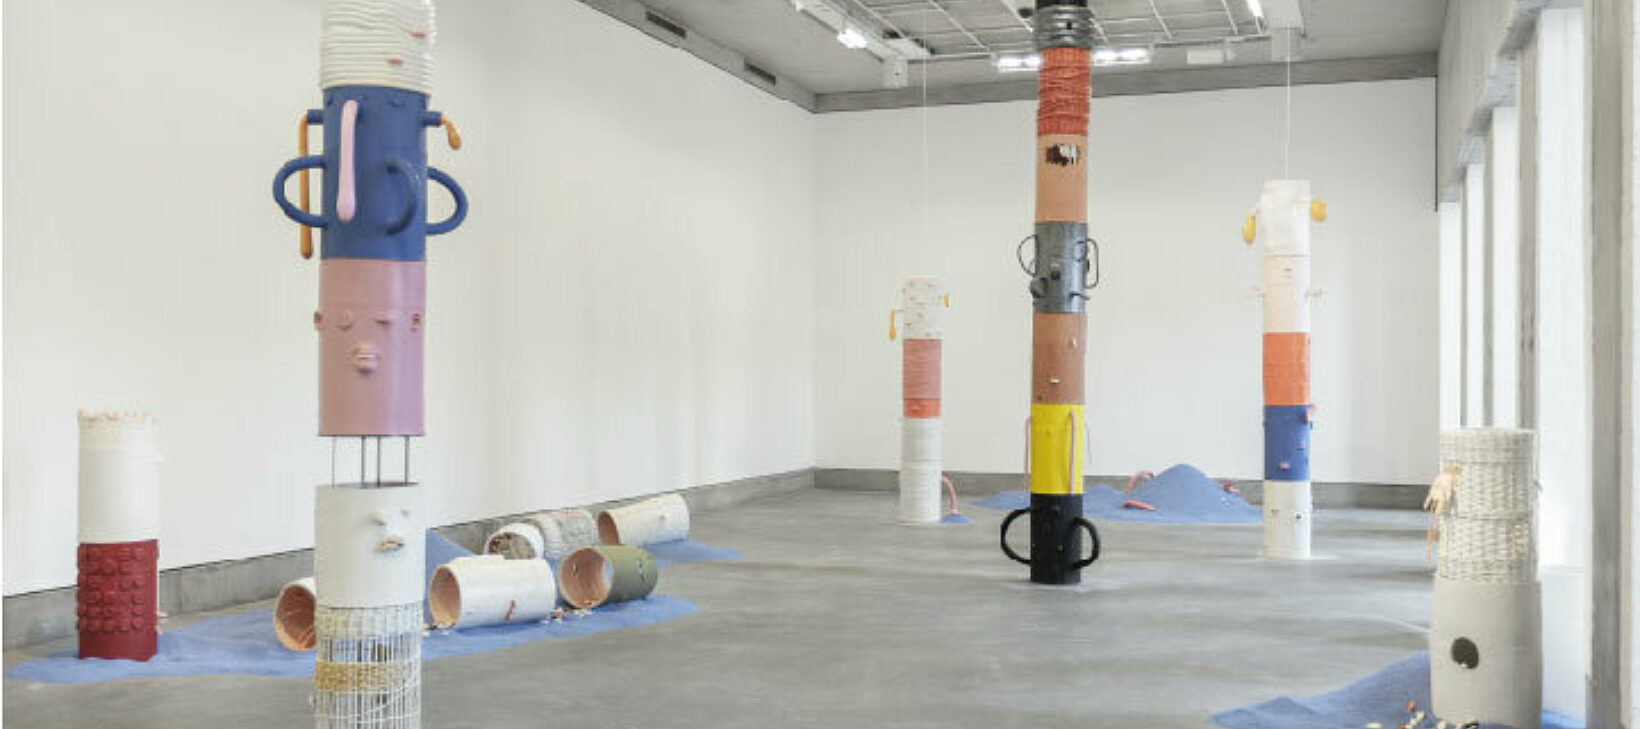 A photograph showing Jonathan Baldock's exhibition Facecrime. The image shows a collection of sculptural works; multicoloured ceramic columns with different expressive faces on them.